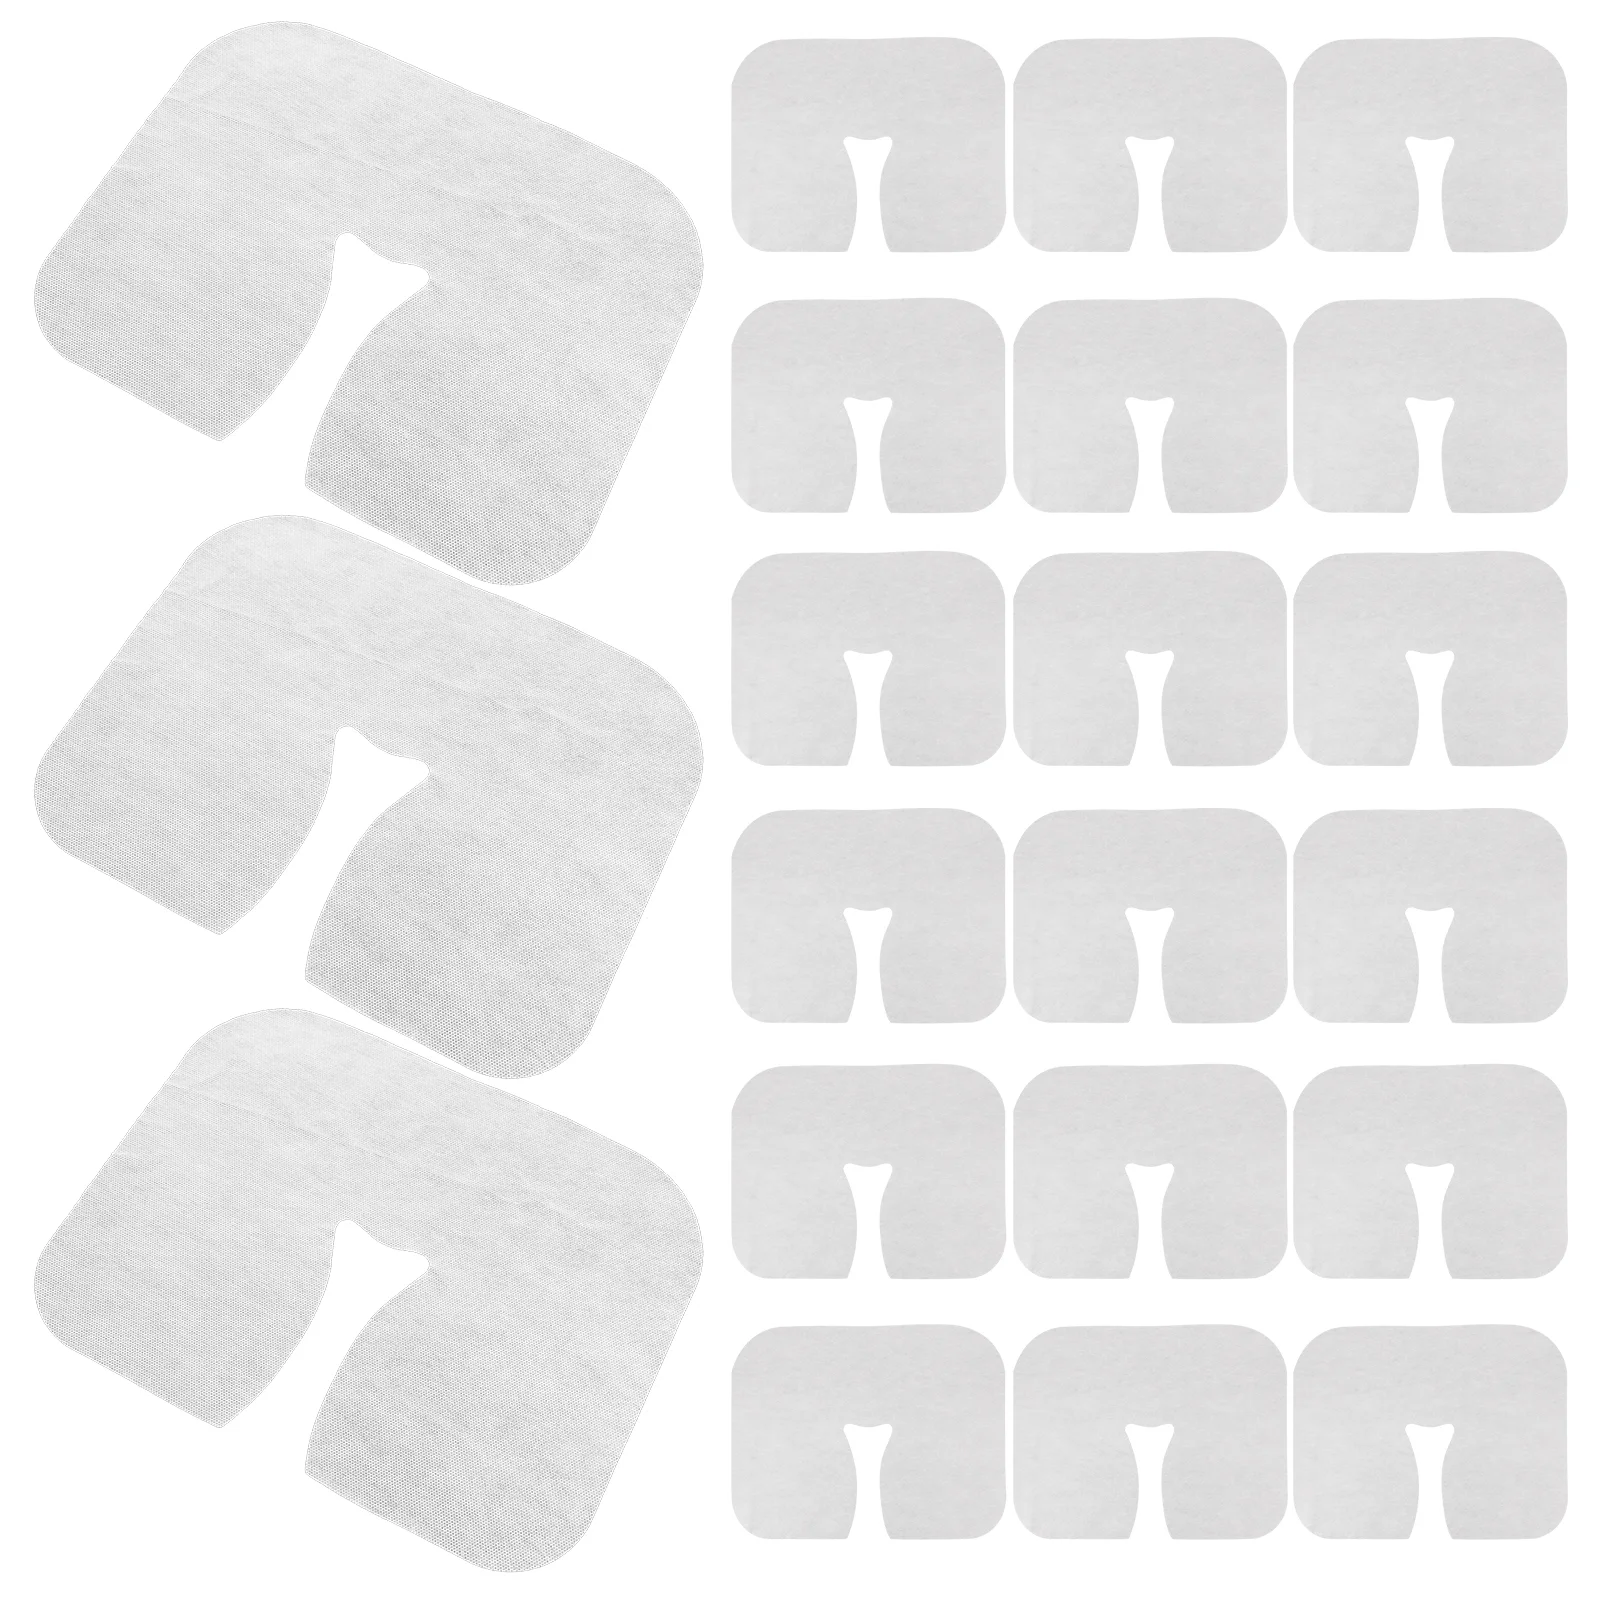 

400 Pcs Disposable Lying Pillow Case Bed Comforter Headrest Mats Hole Pad Face Covers for Salon Non-woven Fabric Cushion